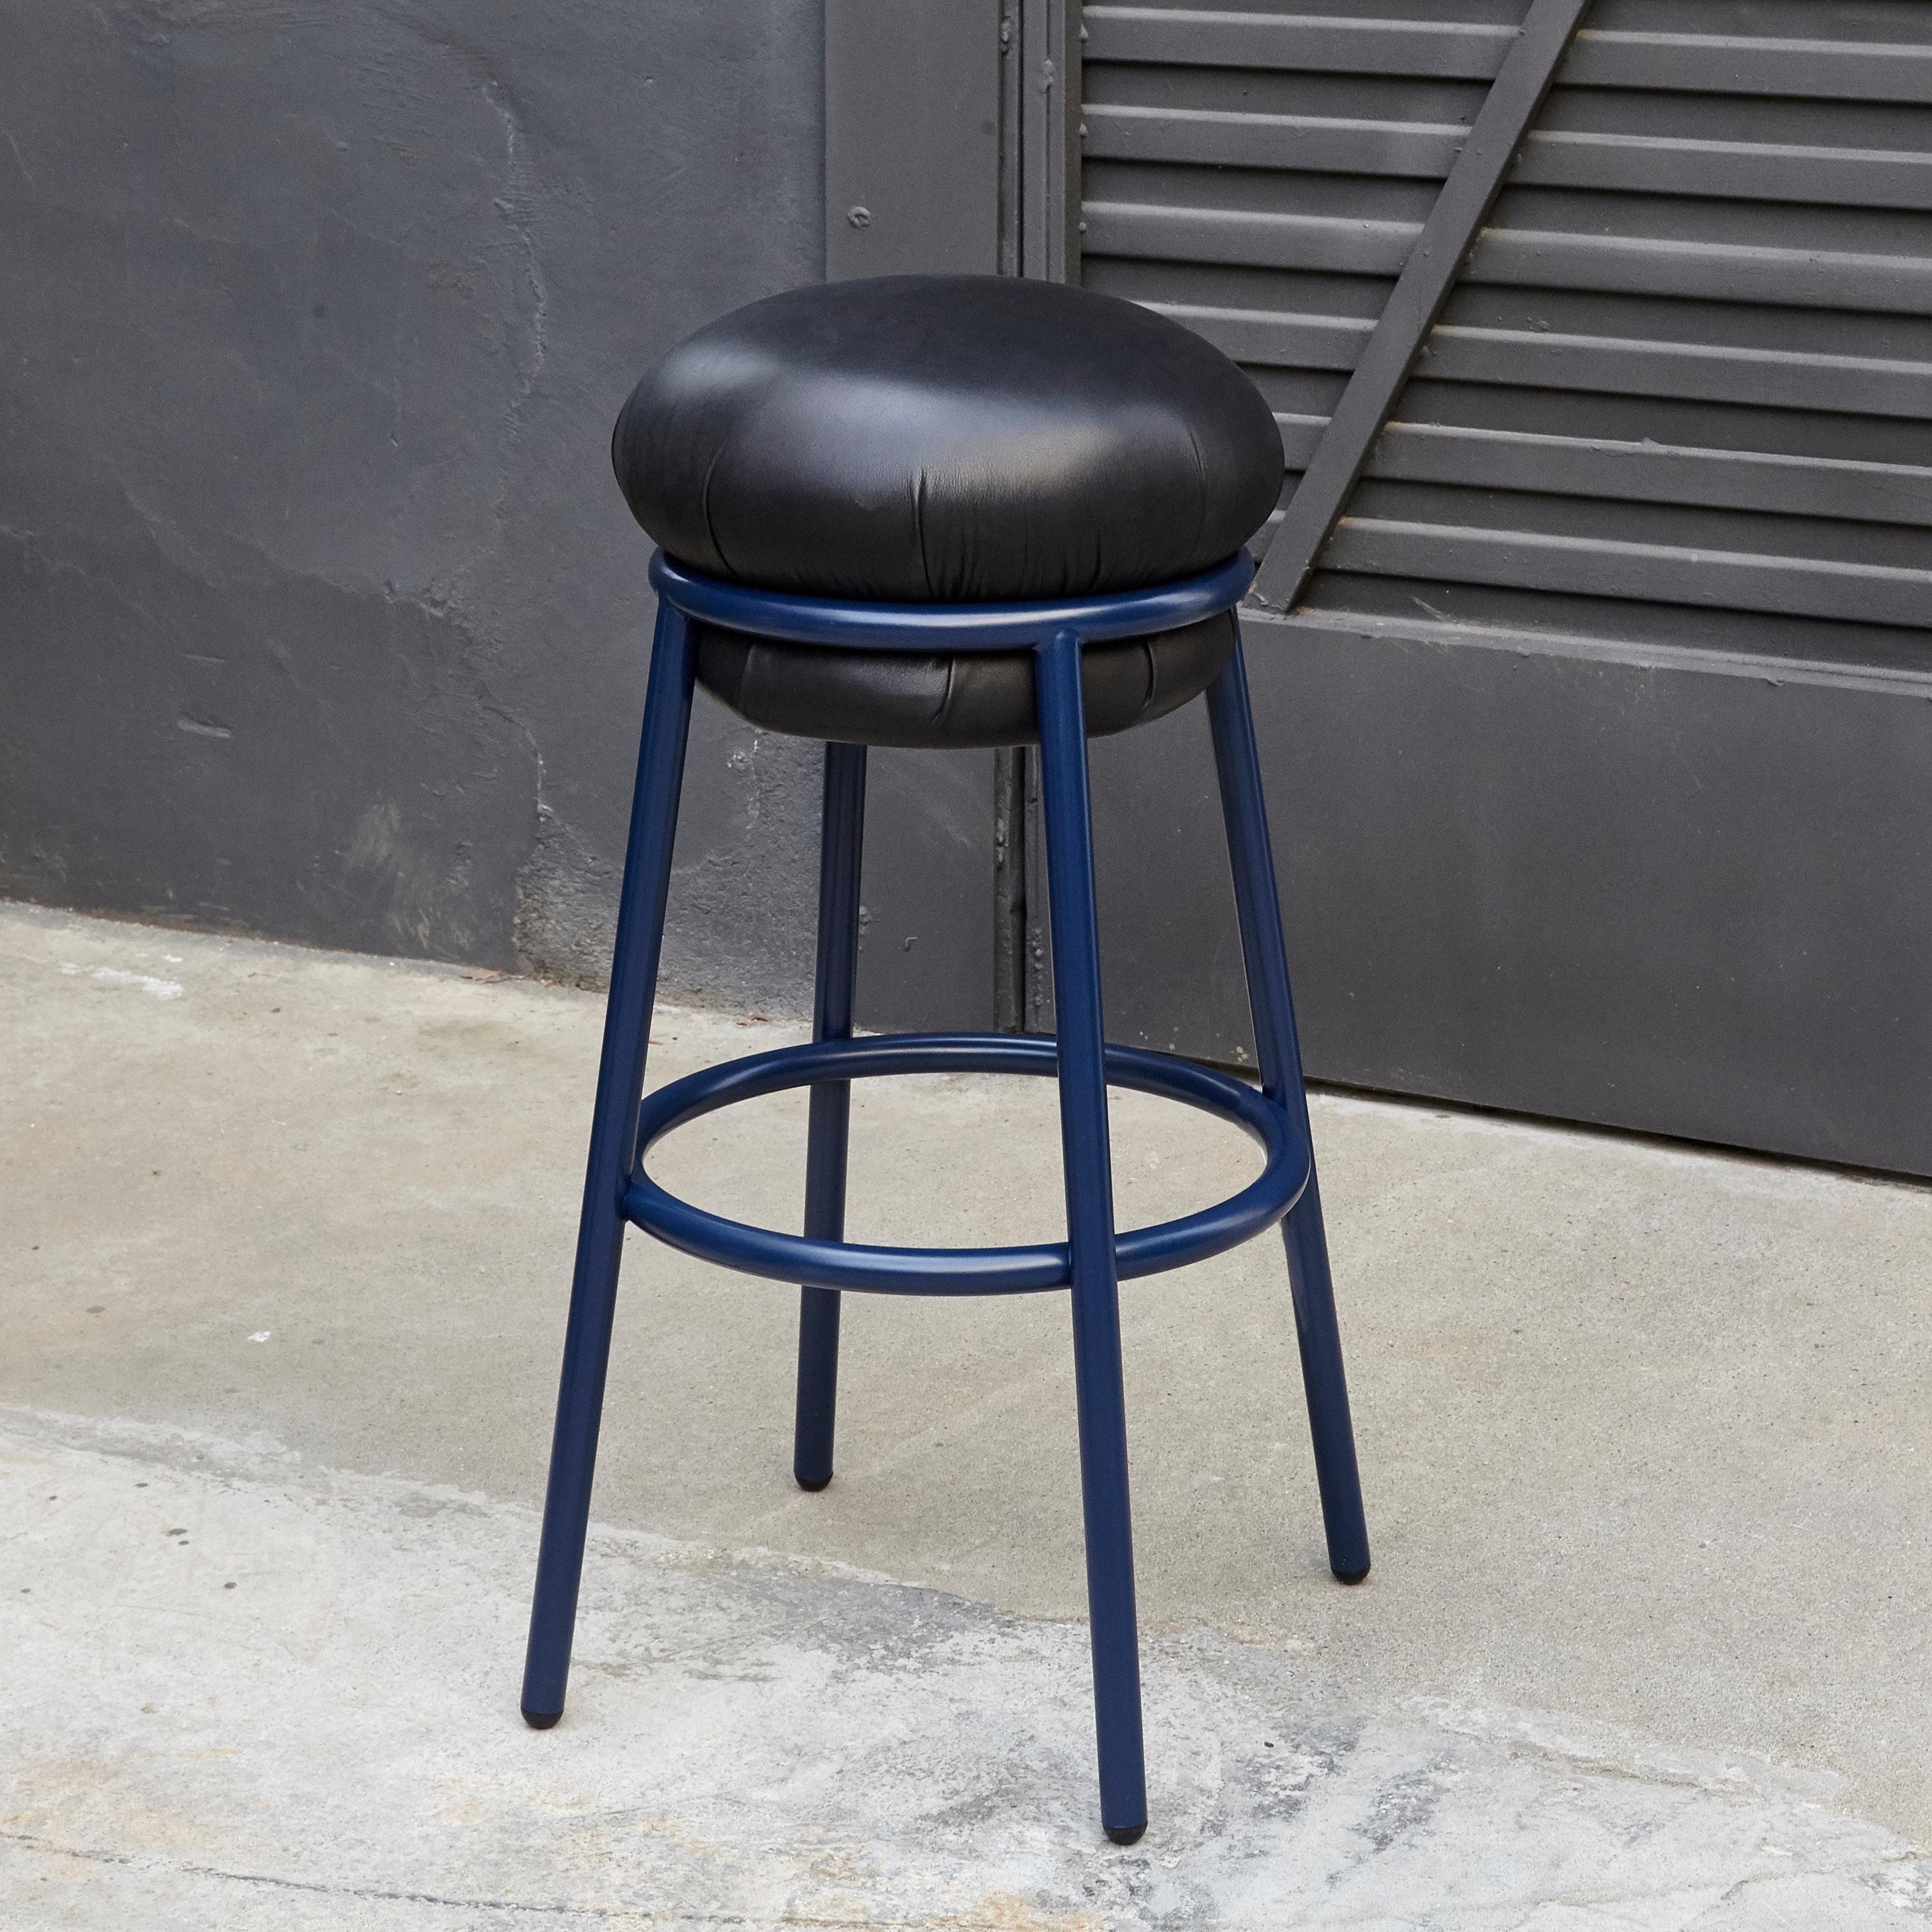 Stool designed by Stephen Burks.

Blue iron tubular (25mm) structured armchair. Seat upholstered in blue leather with blue structure.

The leather upholstery oozes over the bare iron structure. 

Measure: Ø 36 x H 80 cm

Year: 2018.

In